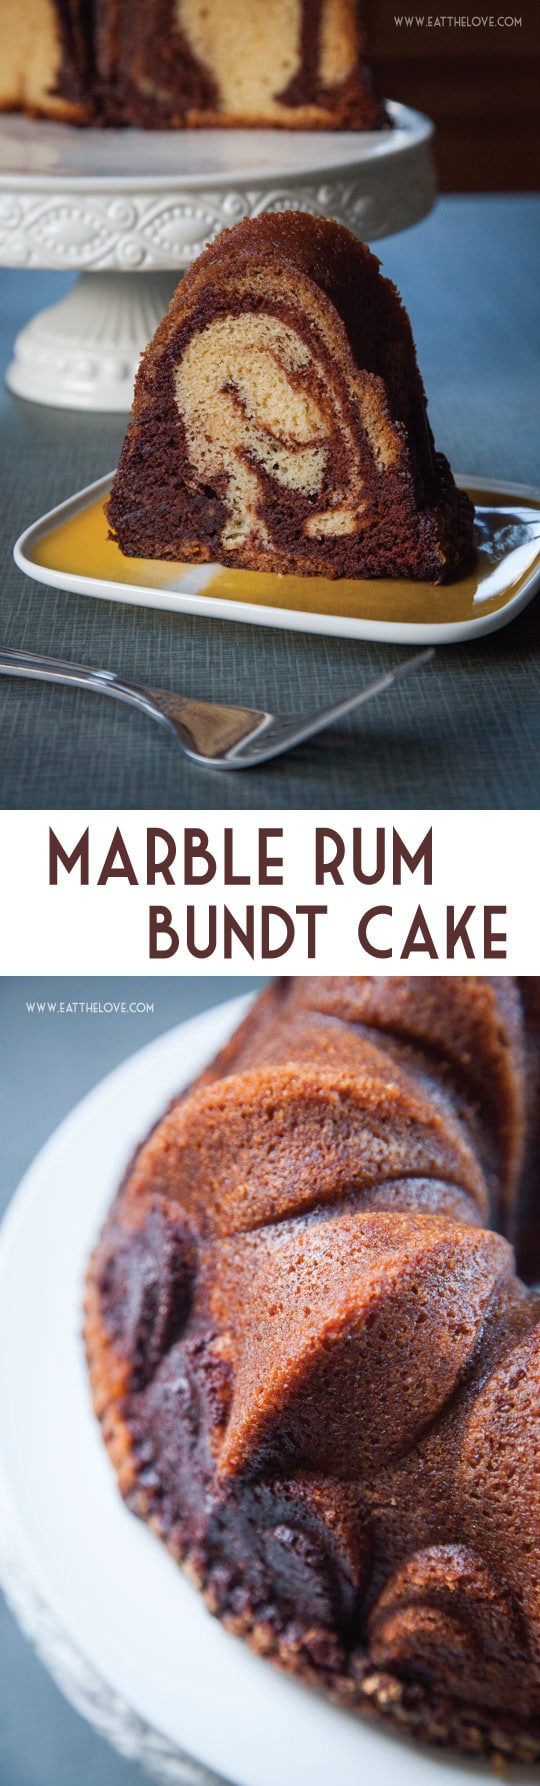 This Marble Rum Cake is easy to make and packed full of rum flavor because I use 3 types of rum! Photo and recipe by Irvin Lin of Eat the Love, author of the cookbook Marbled, Swirled and Layered